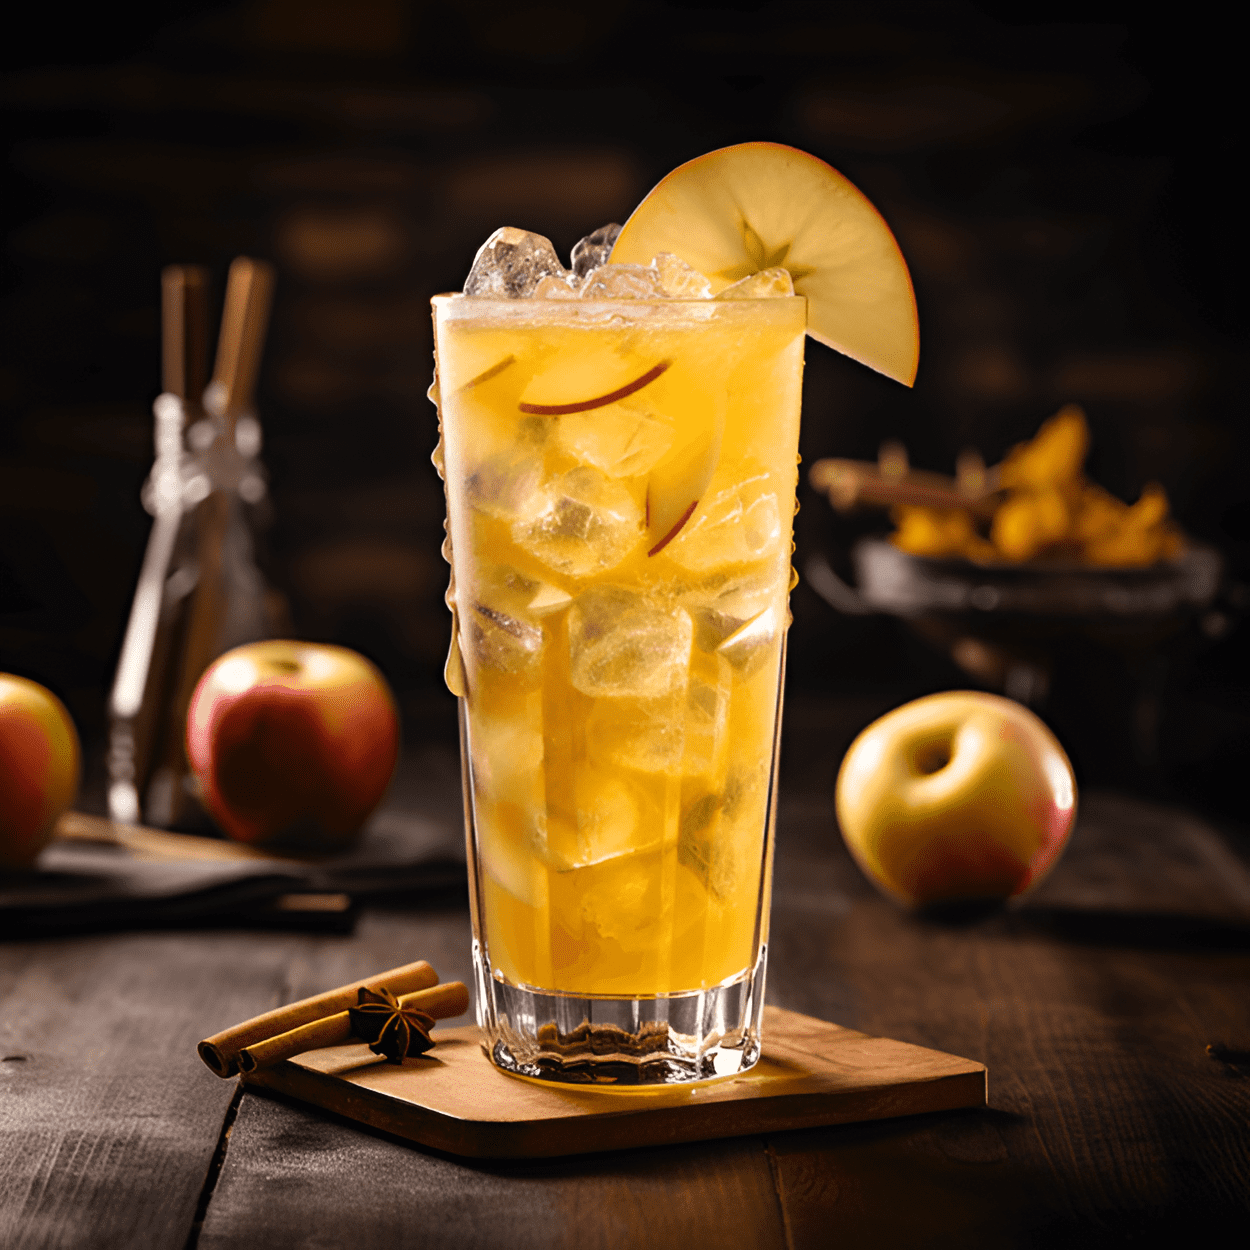 Angry Orchard Cocktail Recipe - The Angry Orchard cocktail has a crisp, sweet, and slightly tart flavor, with a refreshing apple undertone. The hard cider and apple liqueur give it a strong apple taste, while the cinnamon adds a warm, spicy note.